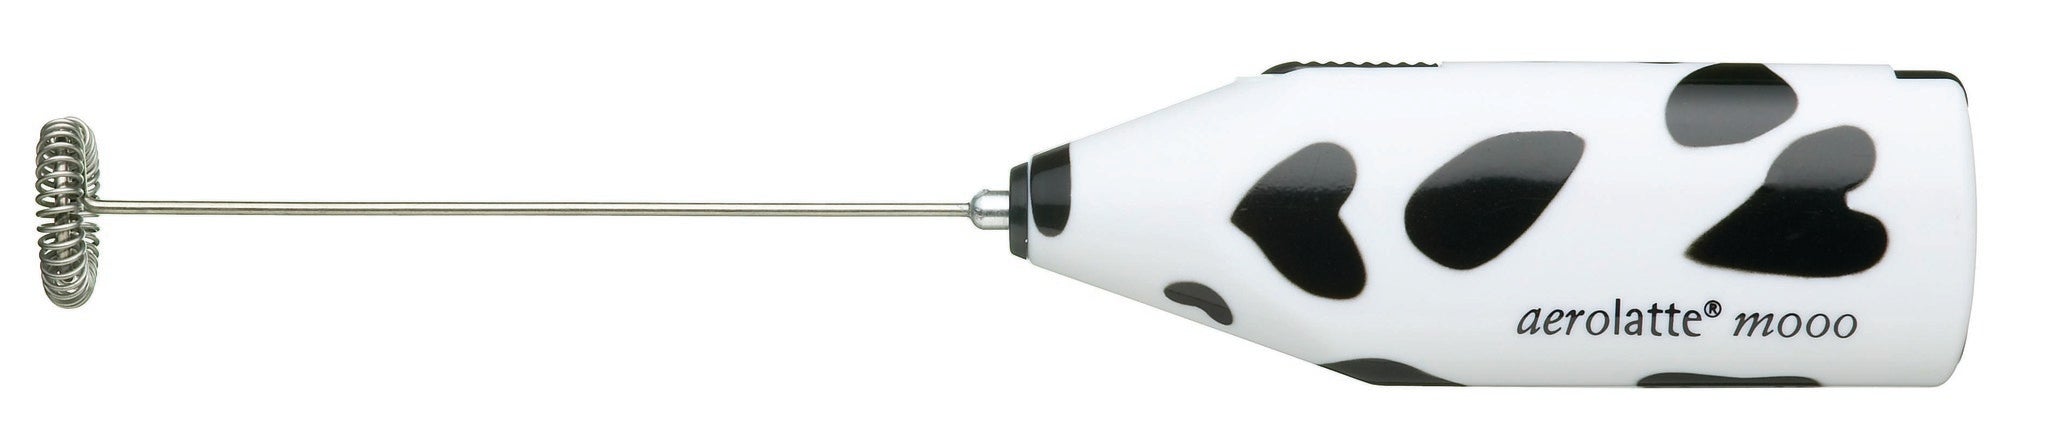 Aerolatte Milk Frother with Black Case, Display of 12